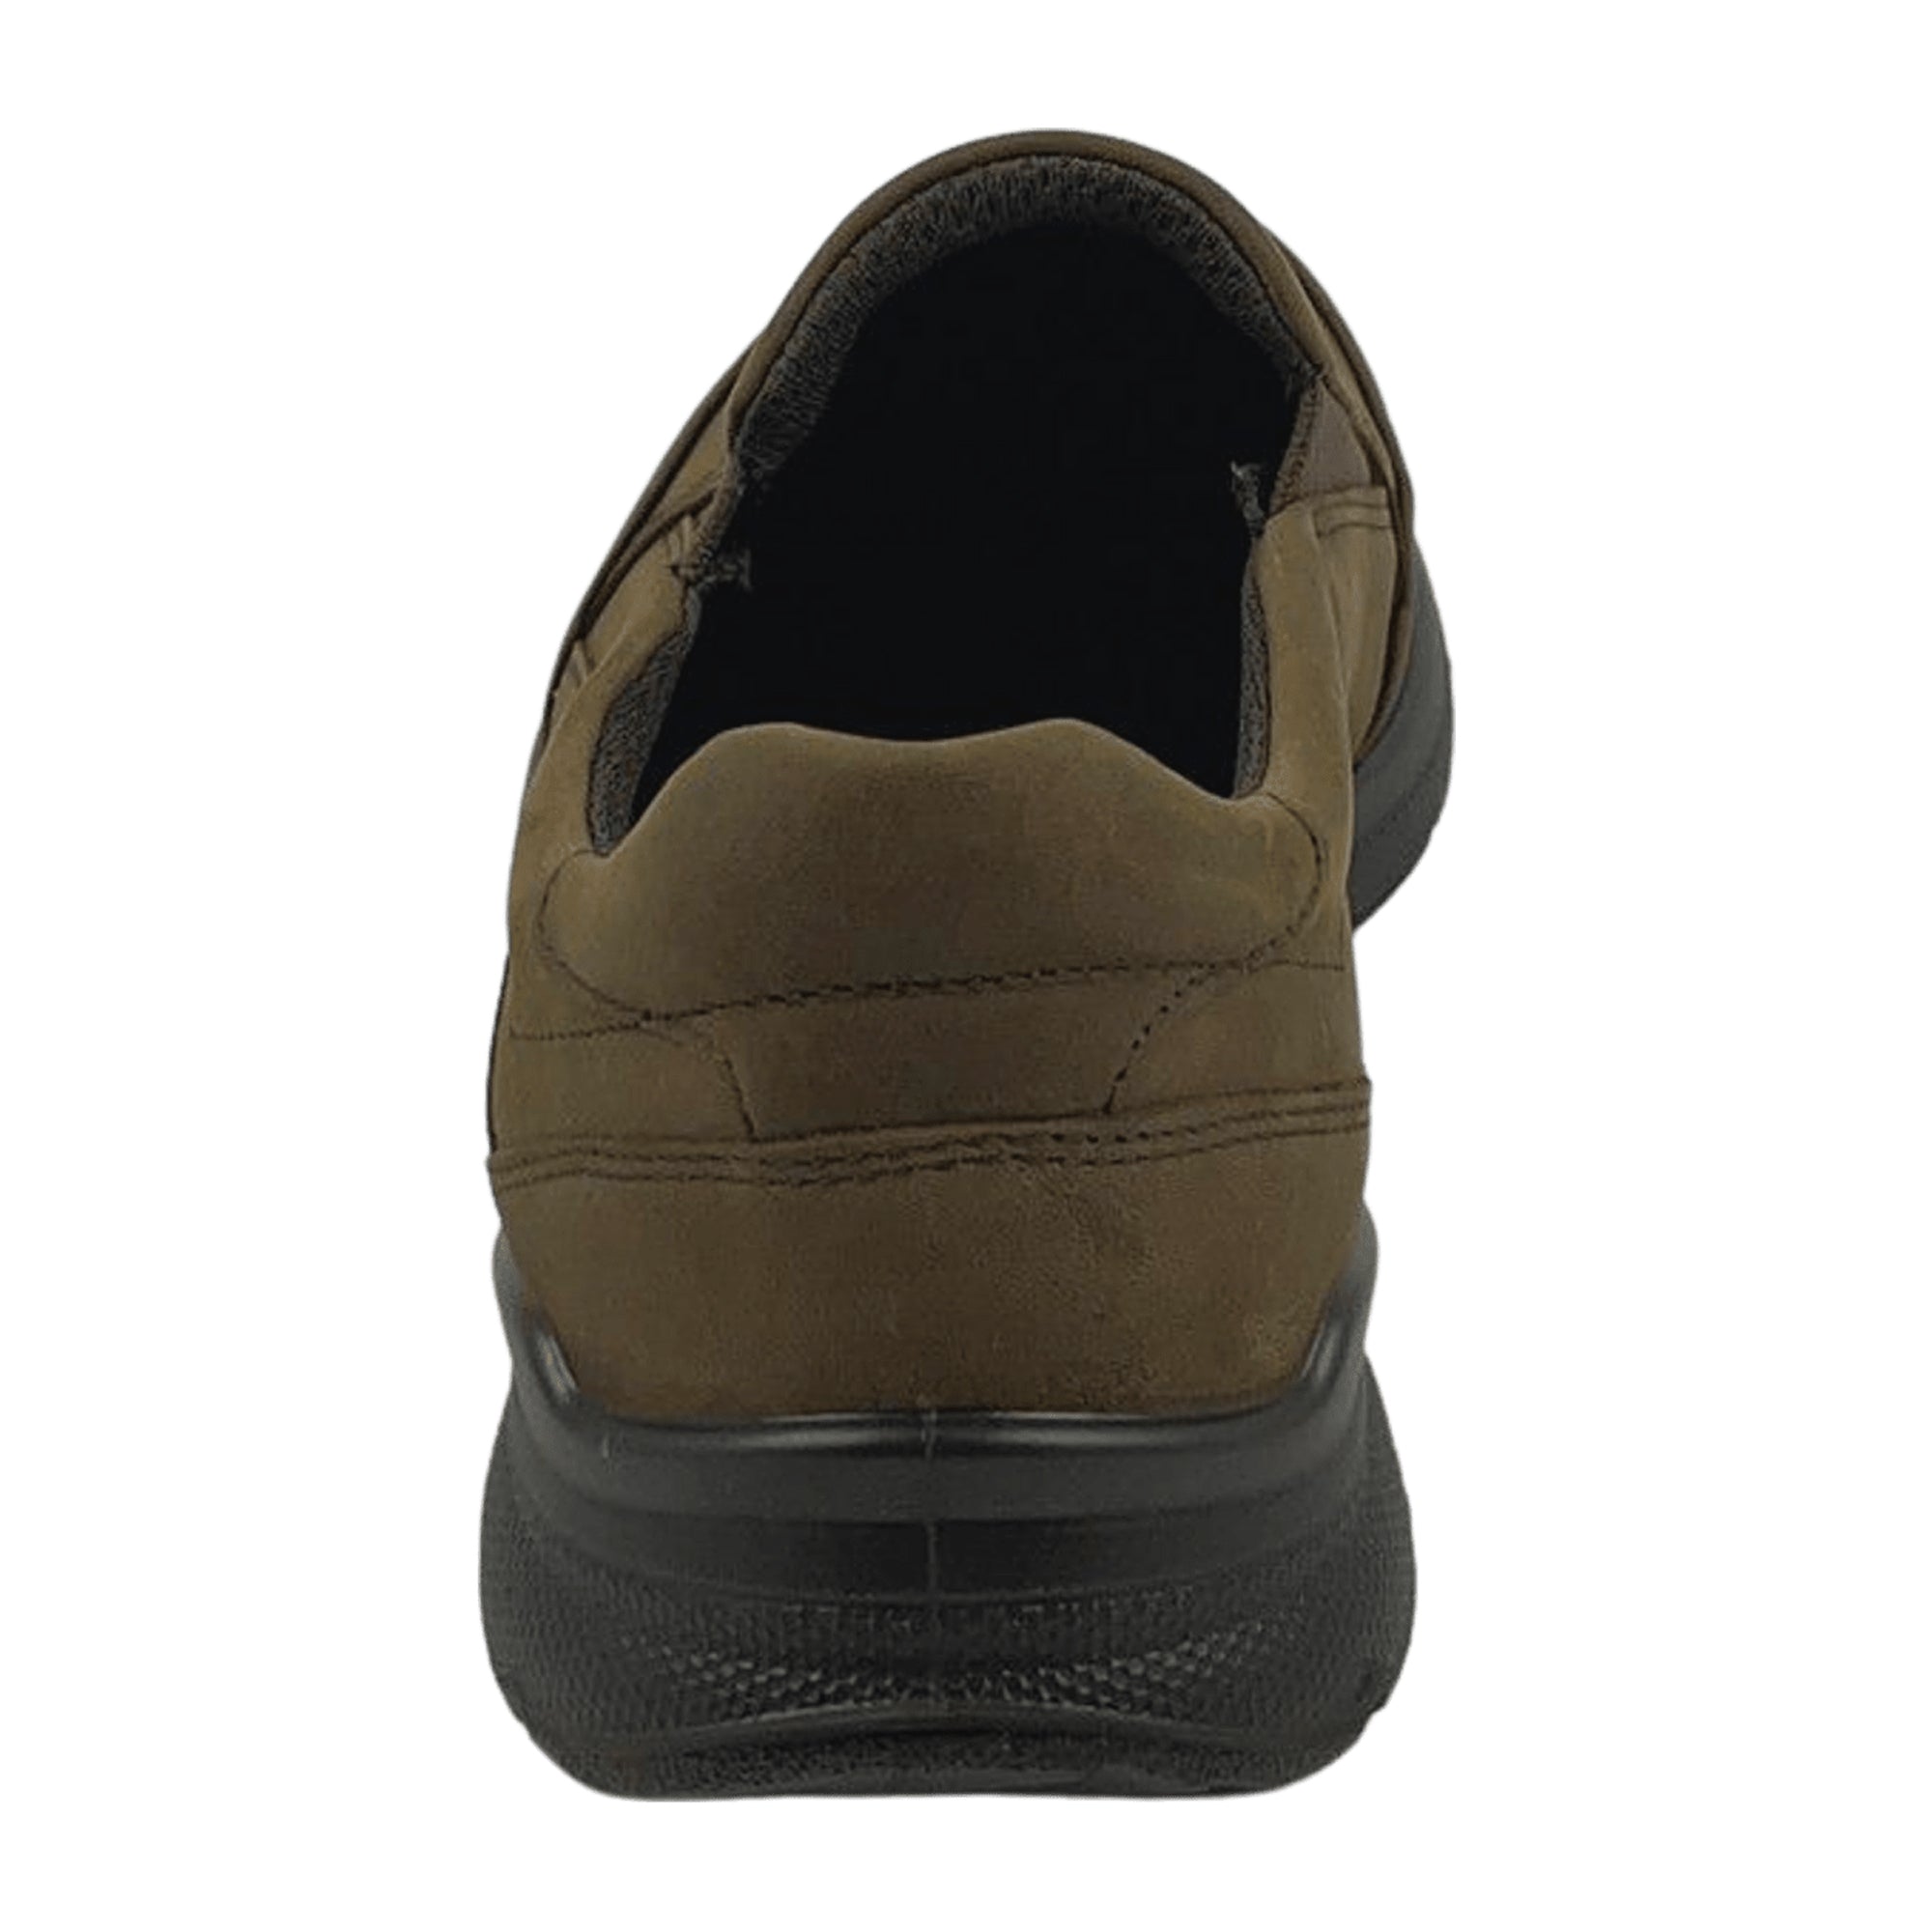 Ecco Men's Brown Leather Shoes - Durable & Stylish Footwear